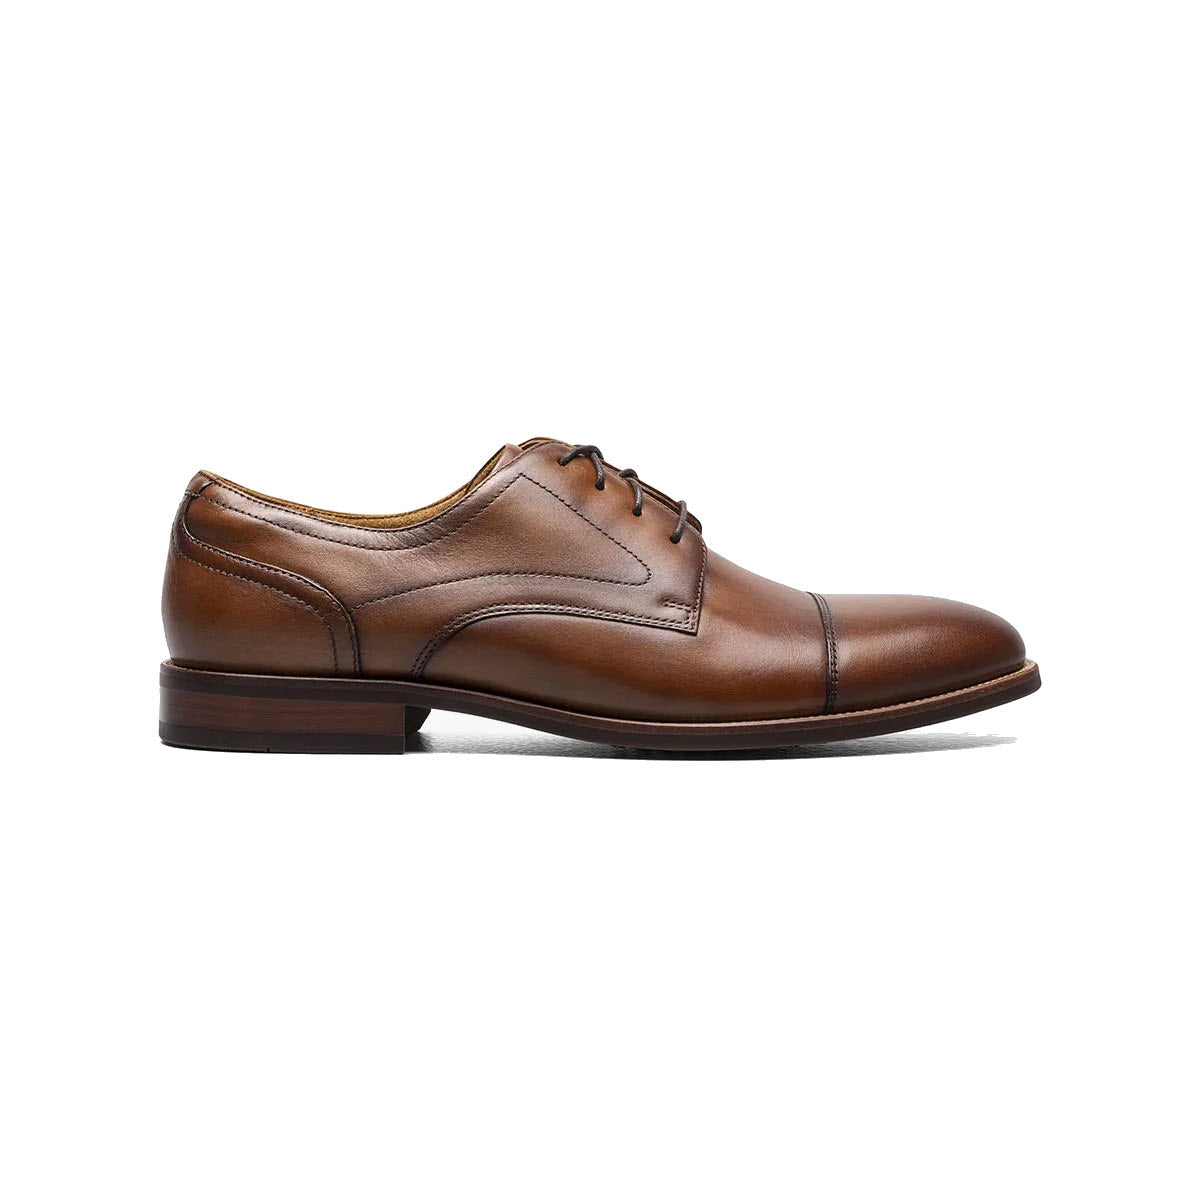 The FLORSHEIM RUCCI CAP TOE OXFORD COGNAC- MENS, featuring a brown leather dress shoe with laces and a slightly elevated wooden heel, is displayed against a white background. Its cap toe design and cushioned footbed ensure both style and comfort for any occasion.